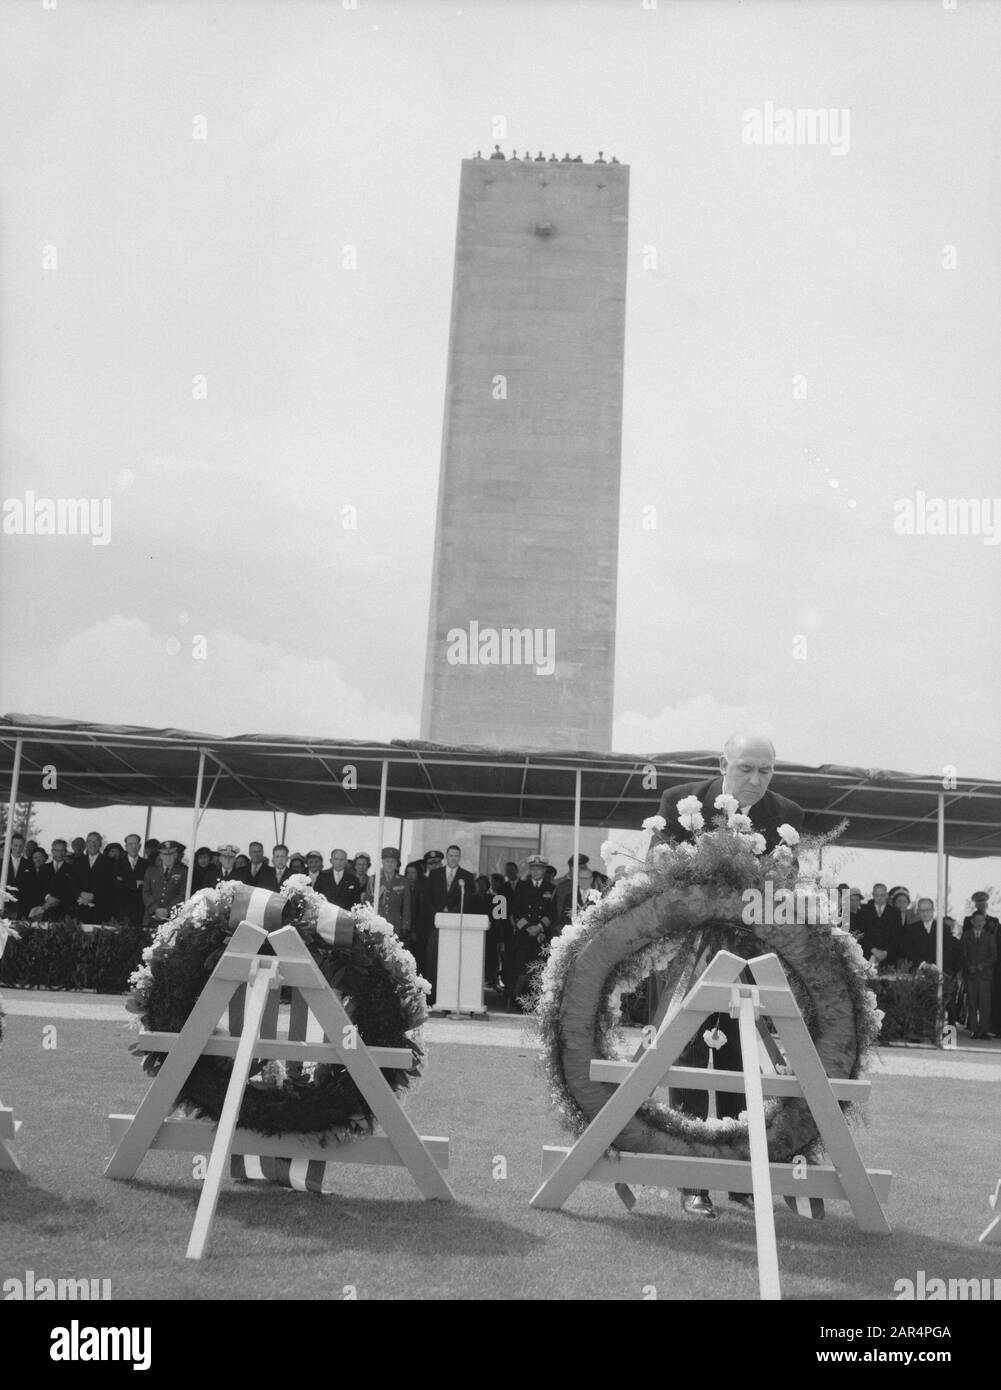 Enthusiastic supporters of De Gaulle for the Elysee Memorial Day at Margraten Date: May 30, 1958 Location: France Keywords: followers Personal name: Gaulle, Charles de Stock Photo